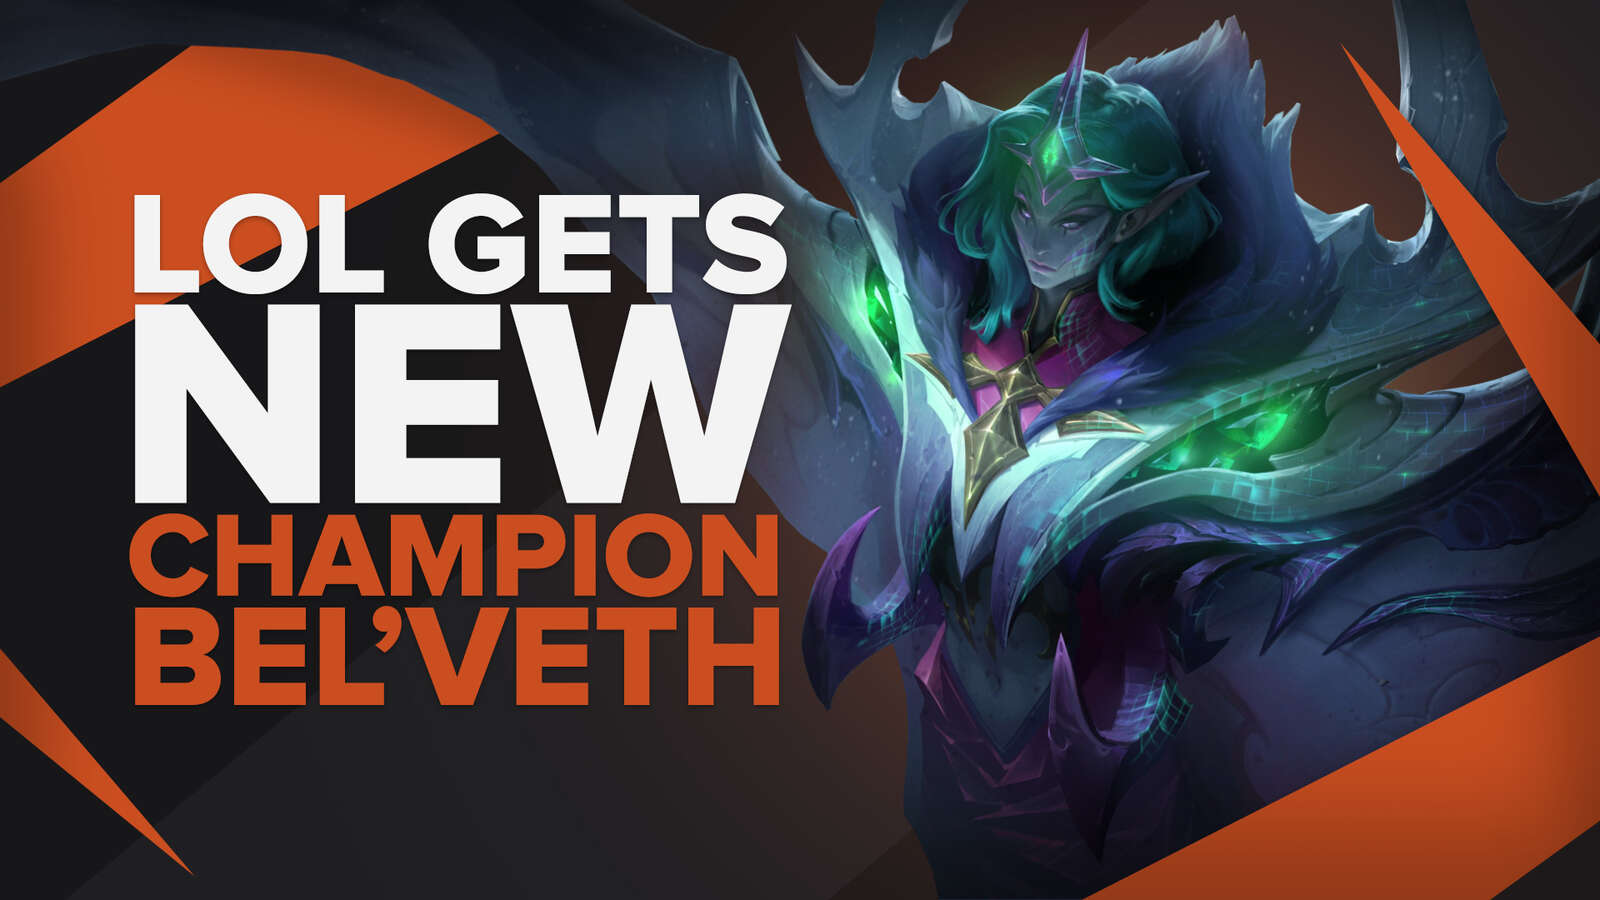 League of Legends Gets a New Champion, Bel’Veth!